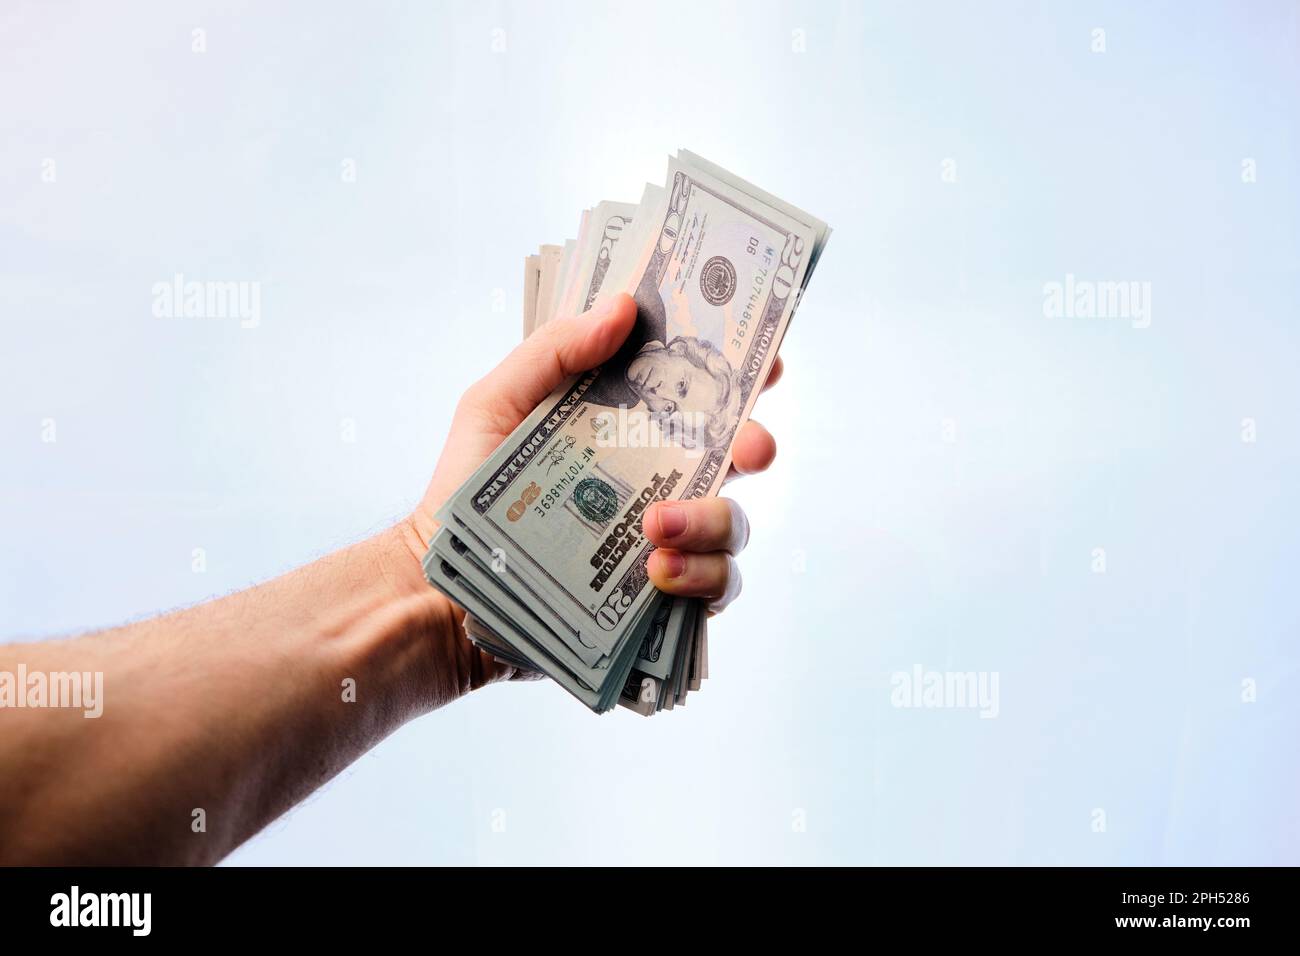 Man's hand clutching a pile of dollars, on a white background. Stock Photo